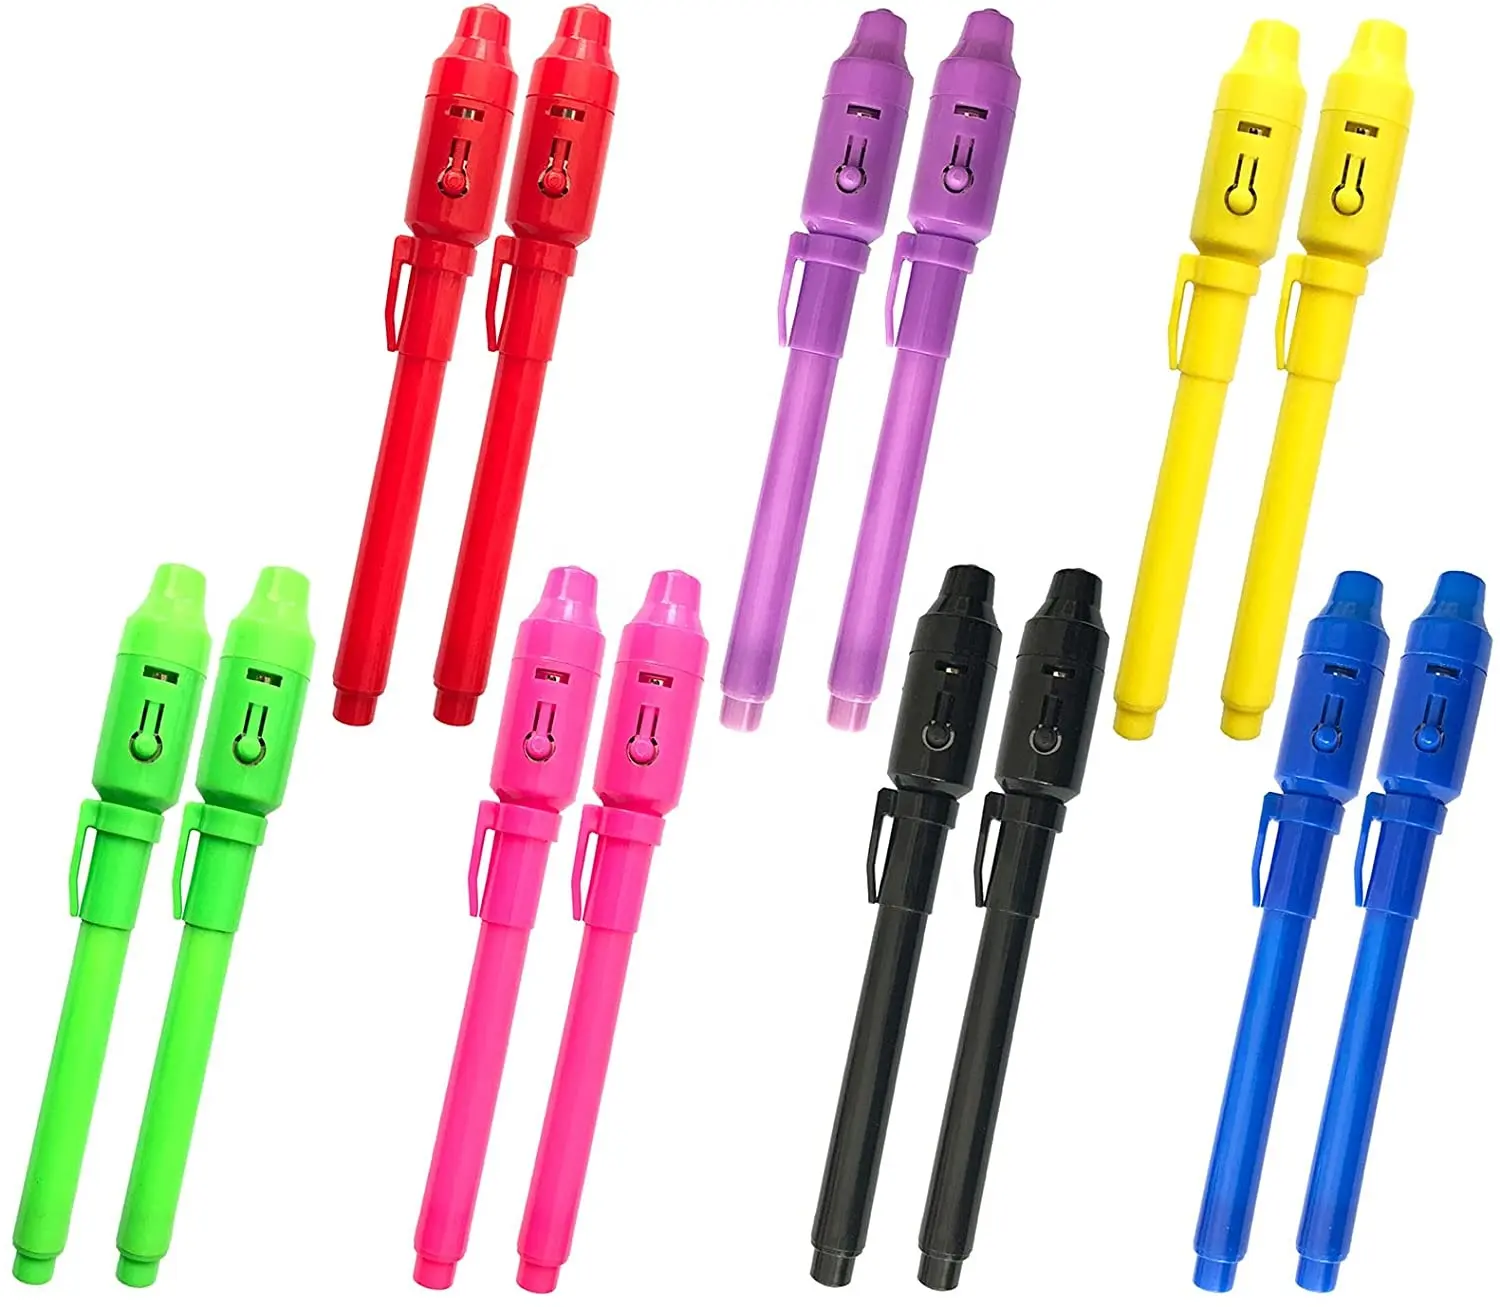 Zeamor Amazon Hot Selling Magic Disappearing UV Invisible Security Ink Spy Pens With Logo For Kids Toys